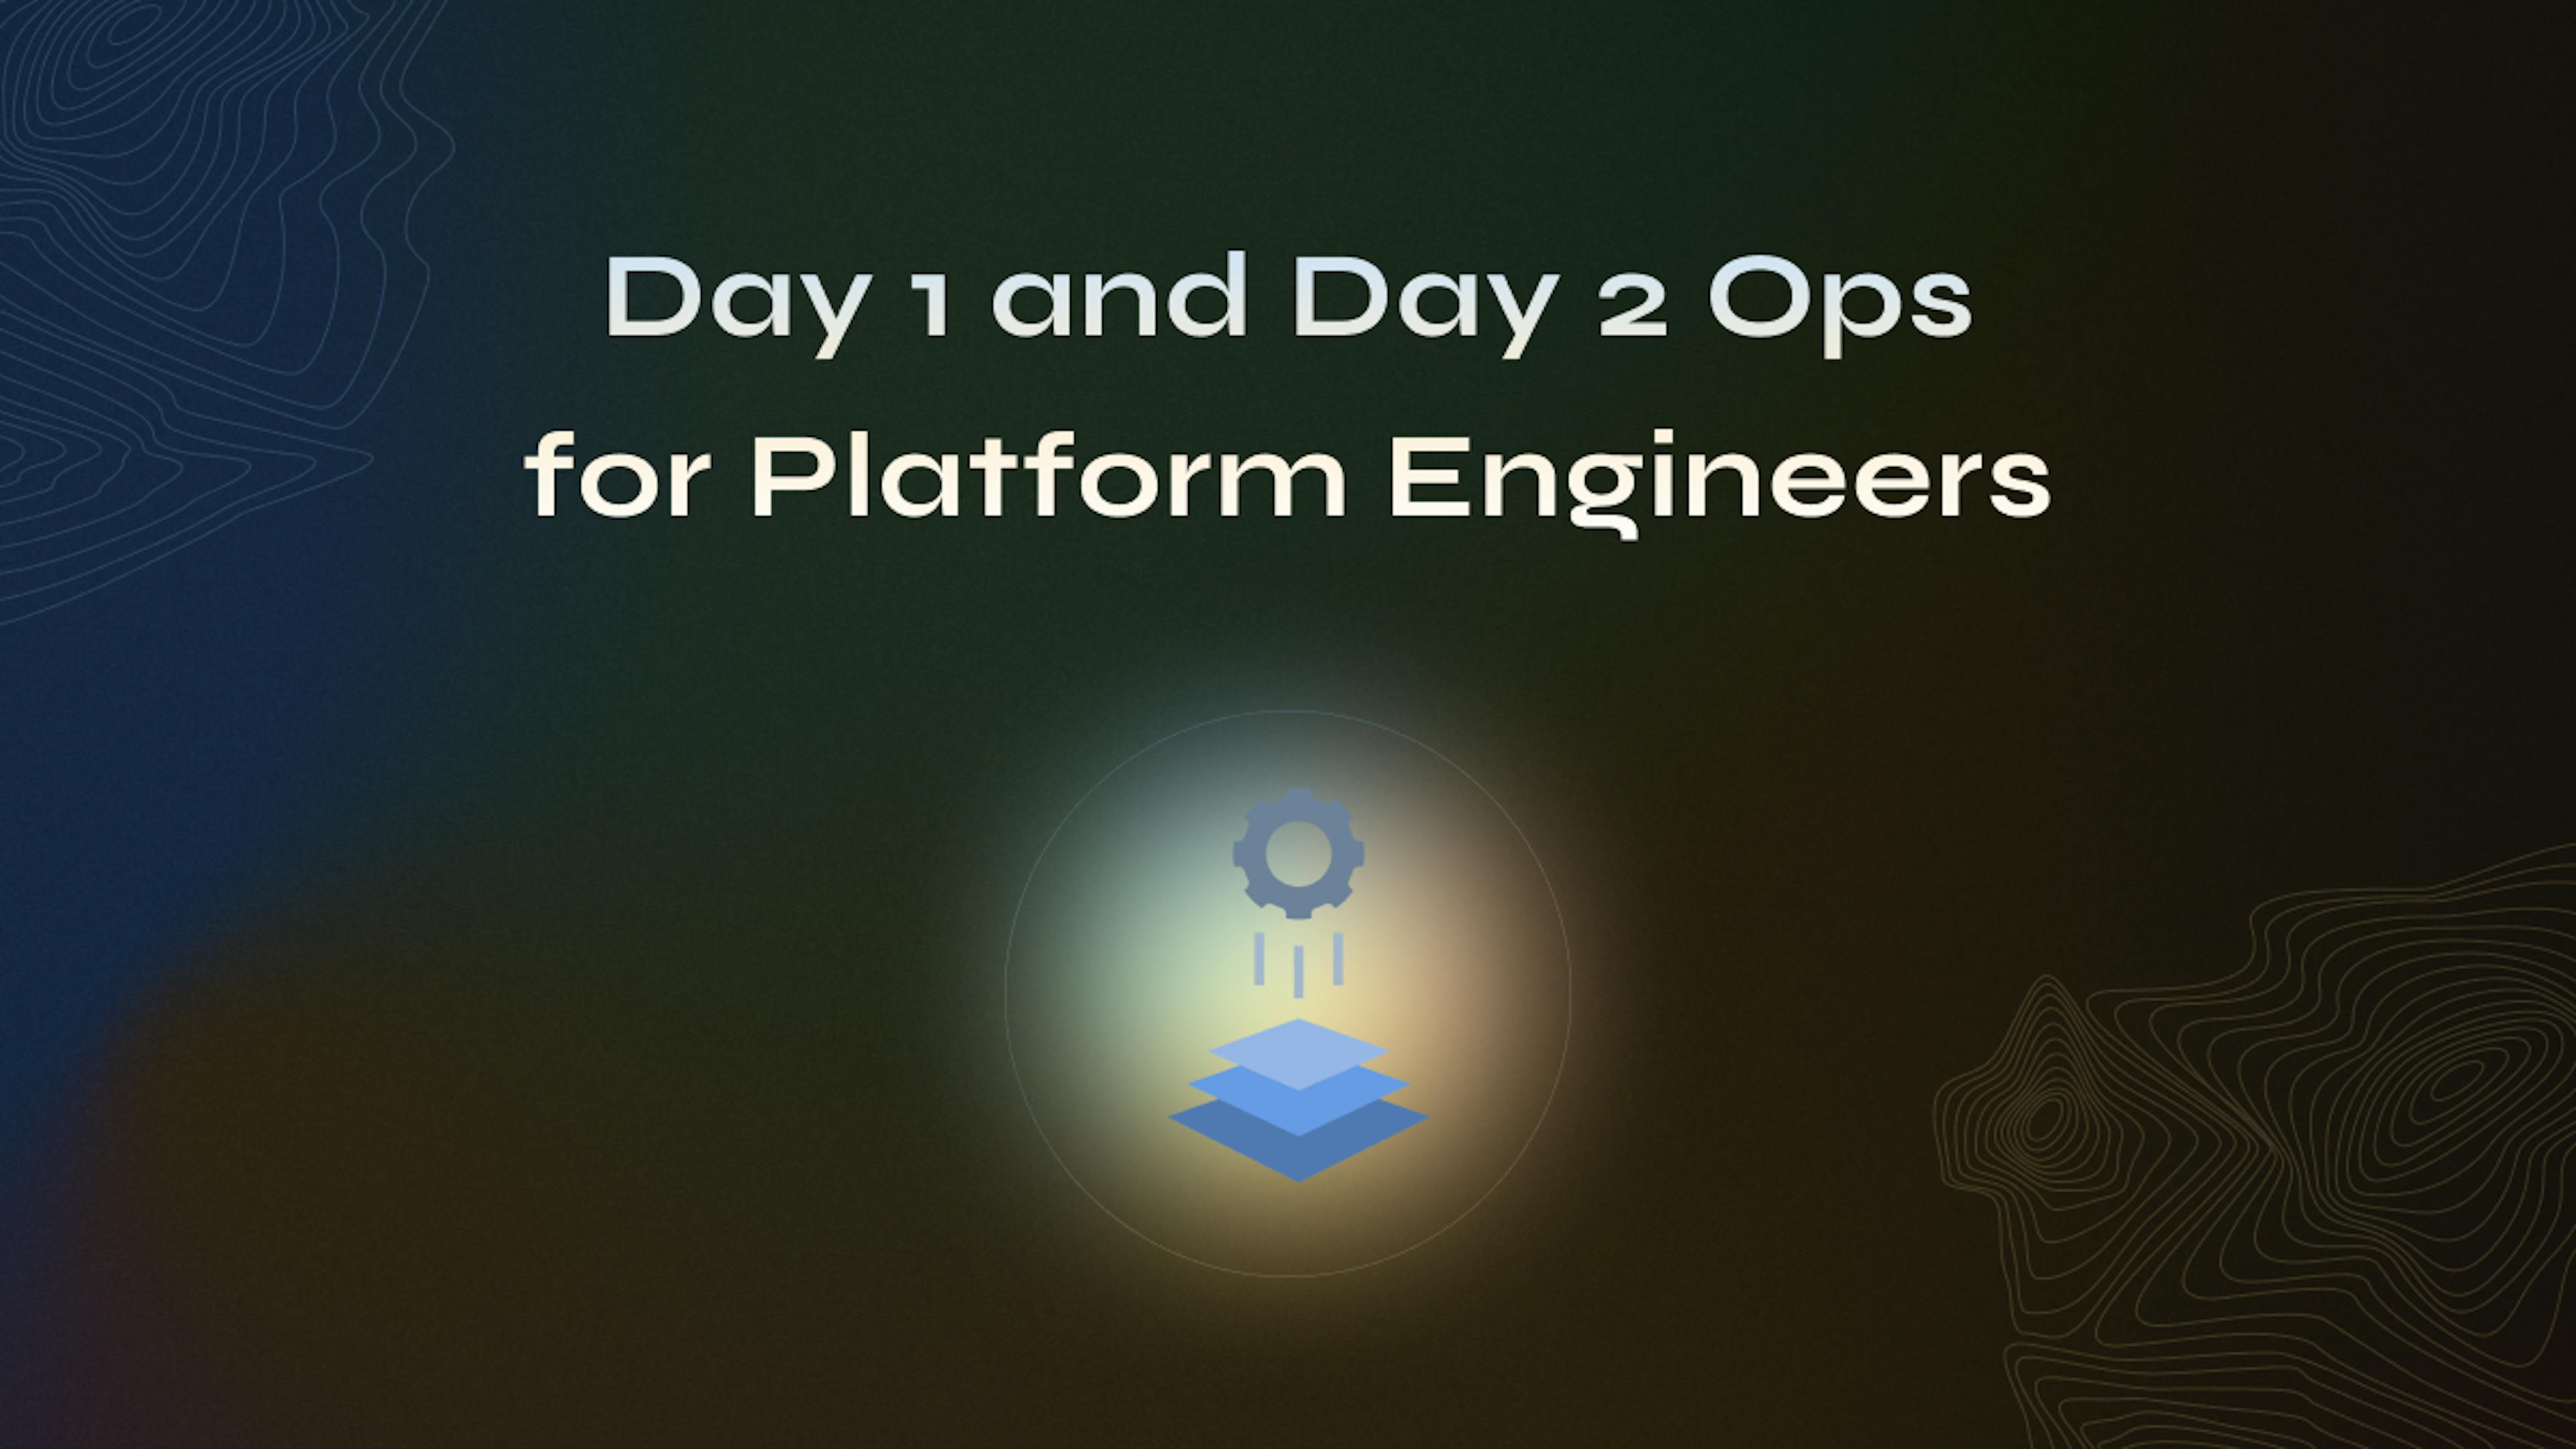 featured image - Day 1 and Day 2 Operations for Platform Engineers